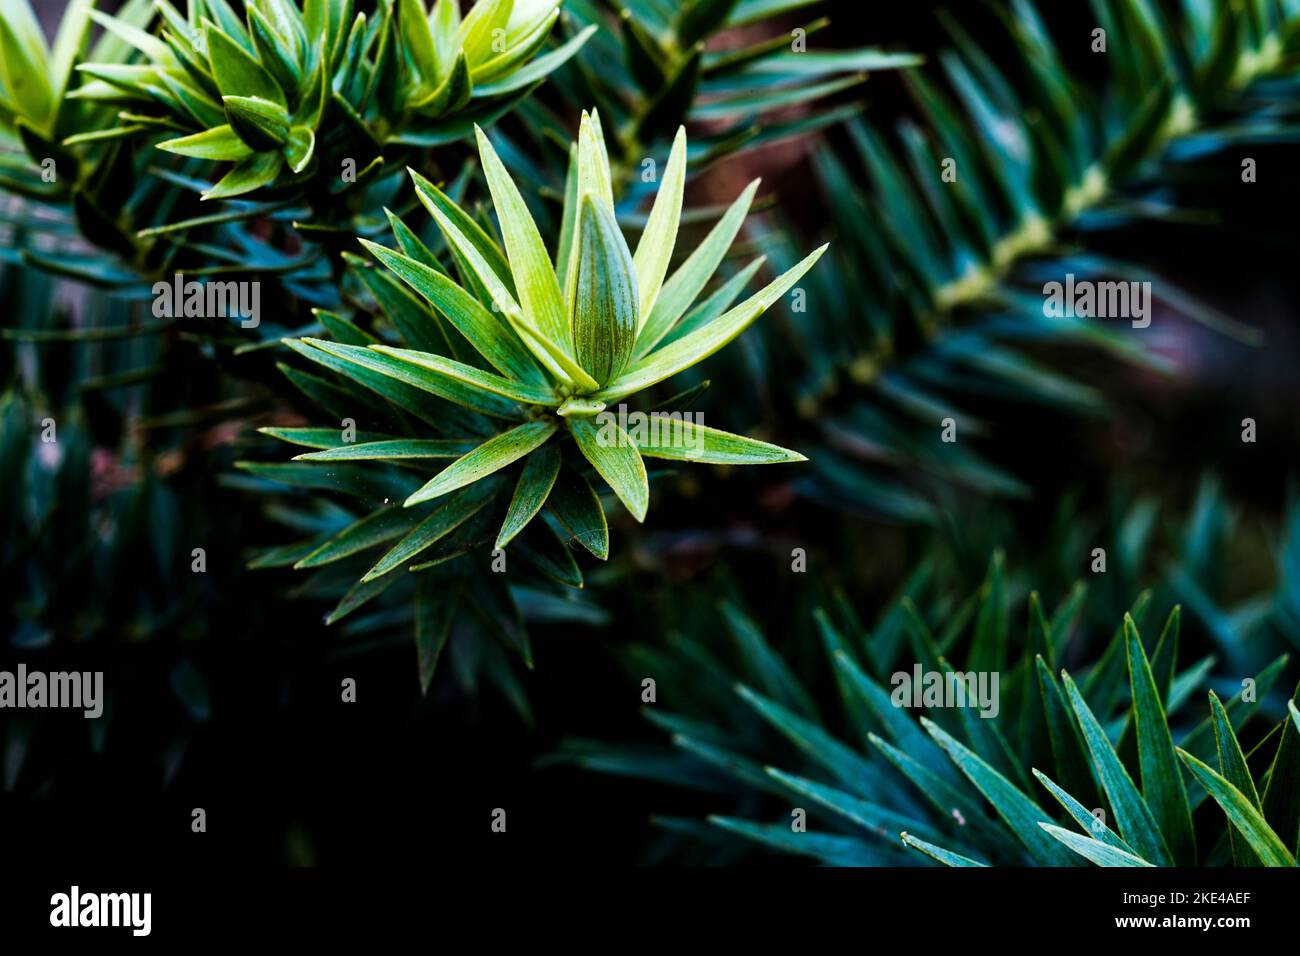 A selective focus shot of leaves of a Bunya pine tree Stock Photo